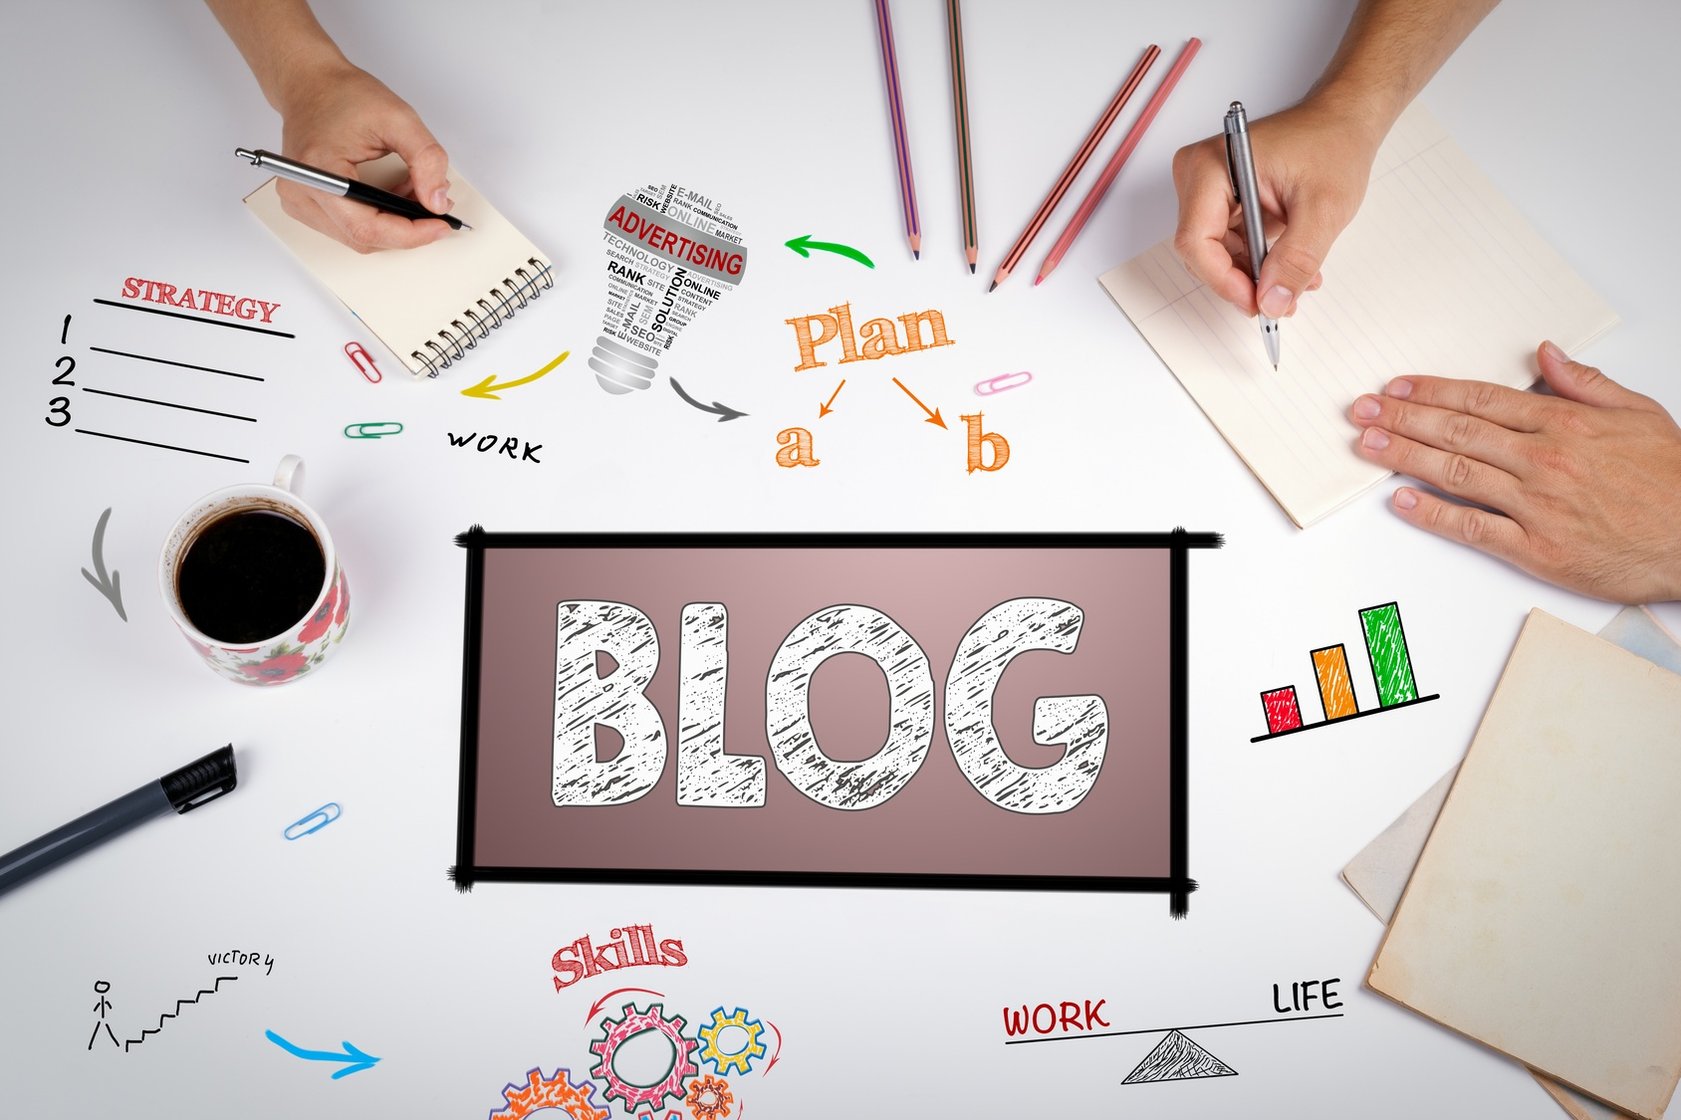 6 Strategies for Writing Better Blog Posts